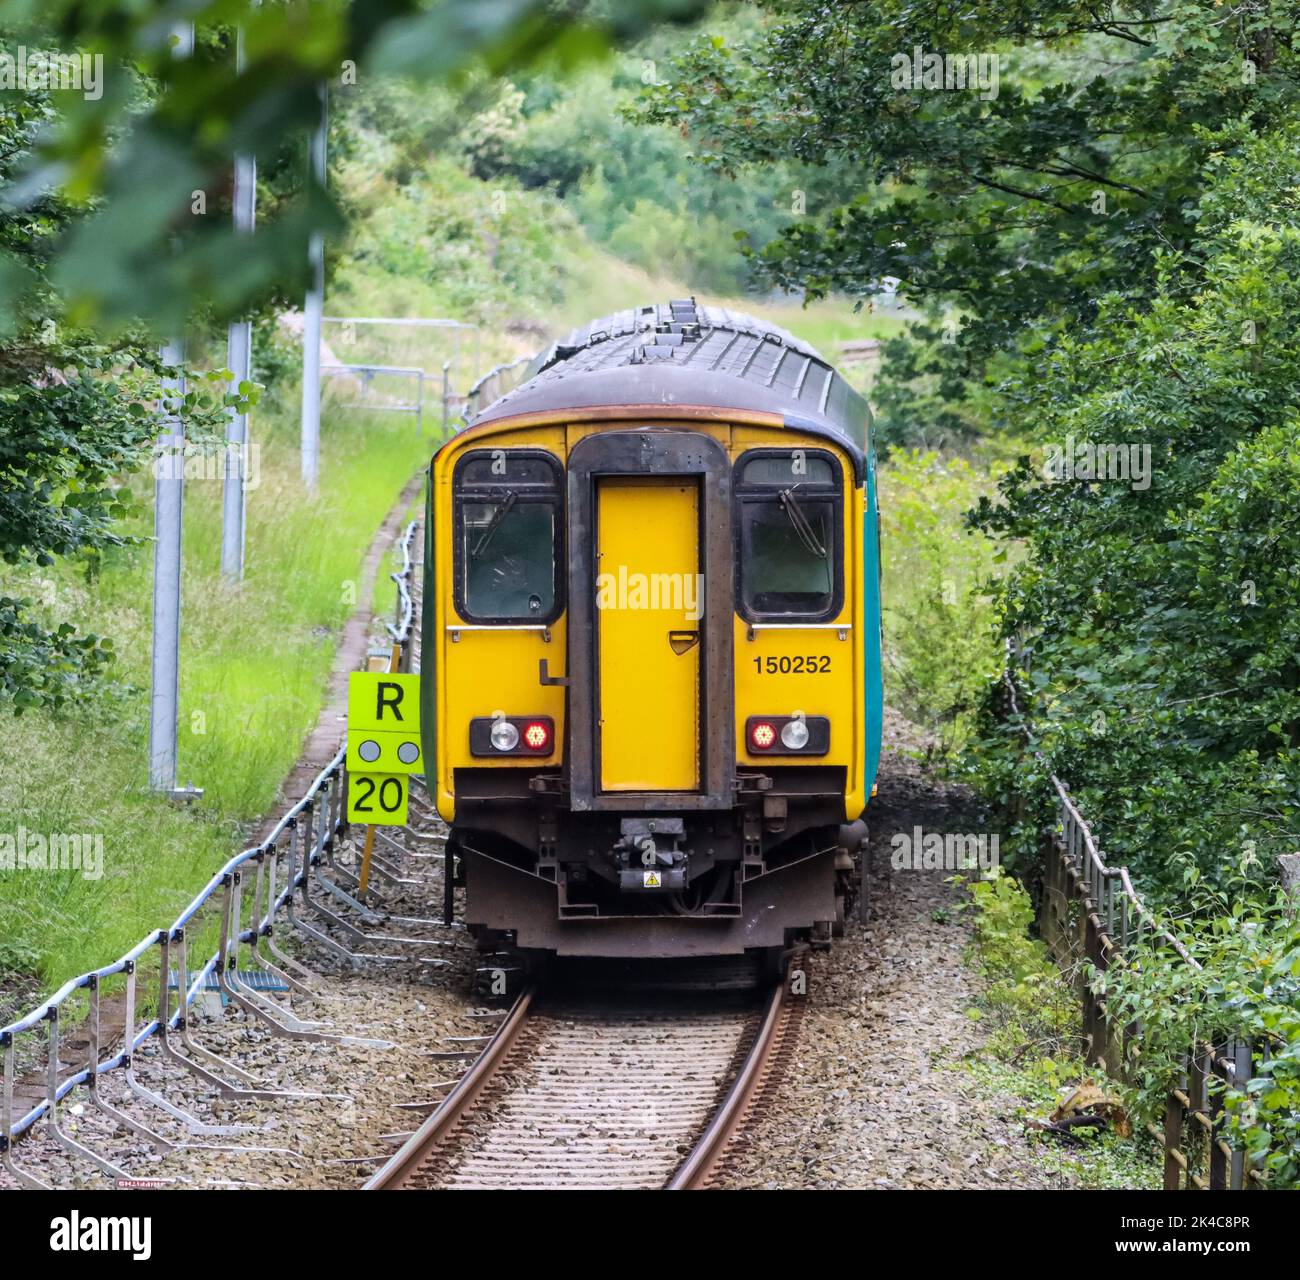 The high-angle view of an old yellow train over the rails passing through the greenery Stock Photo